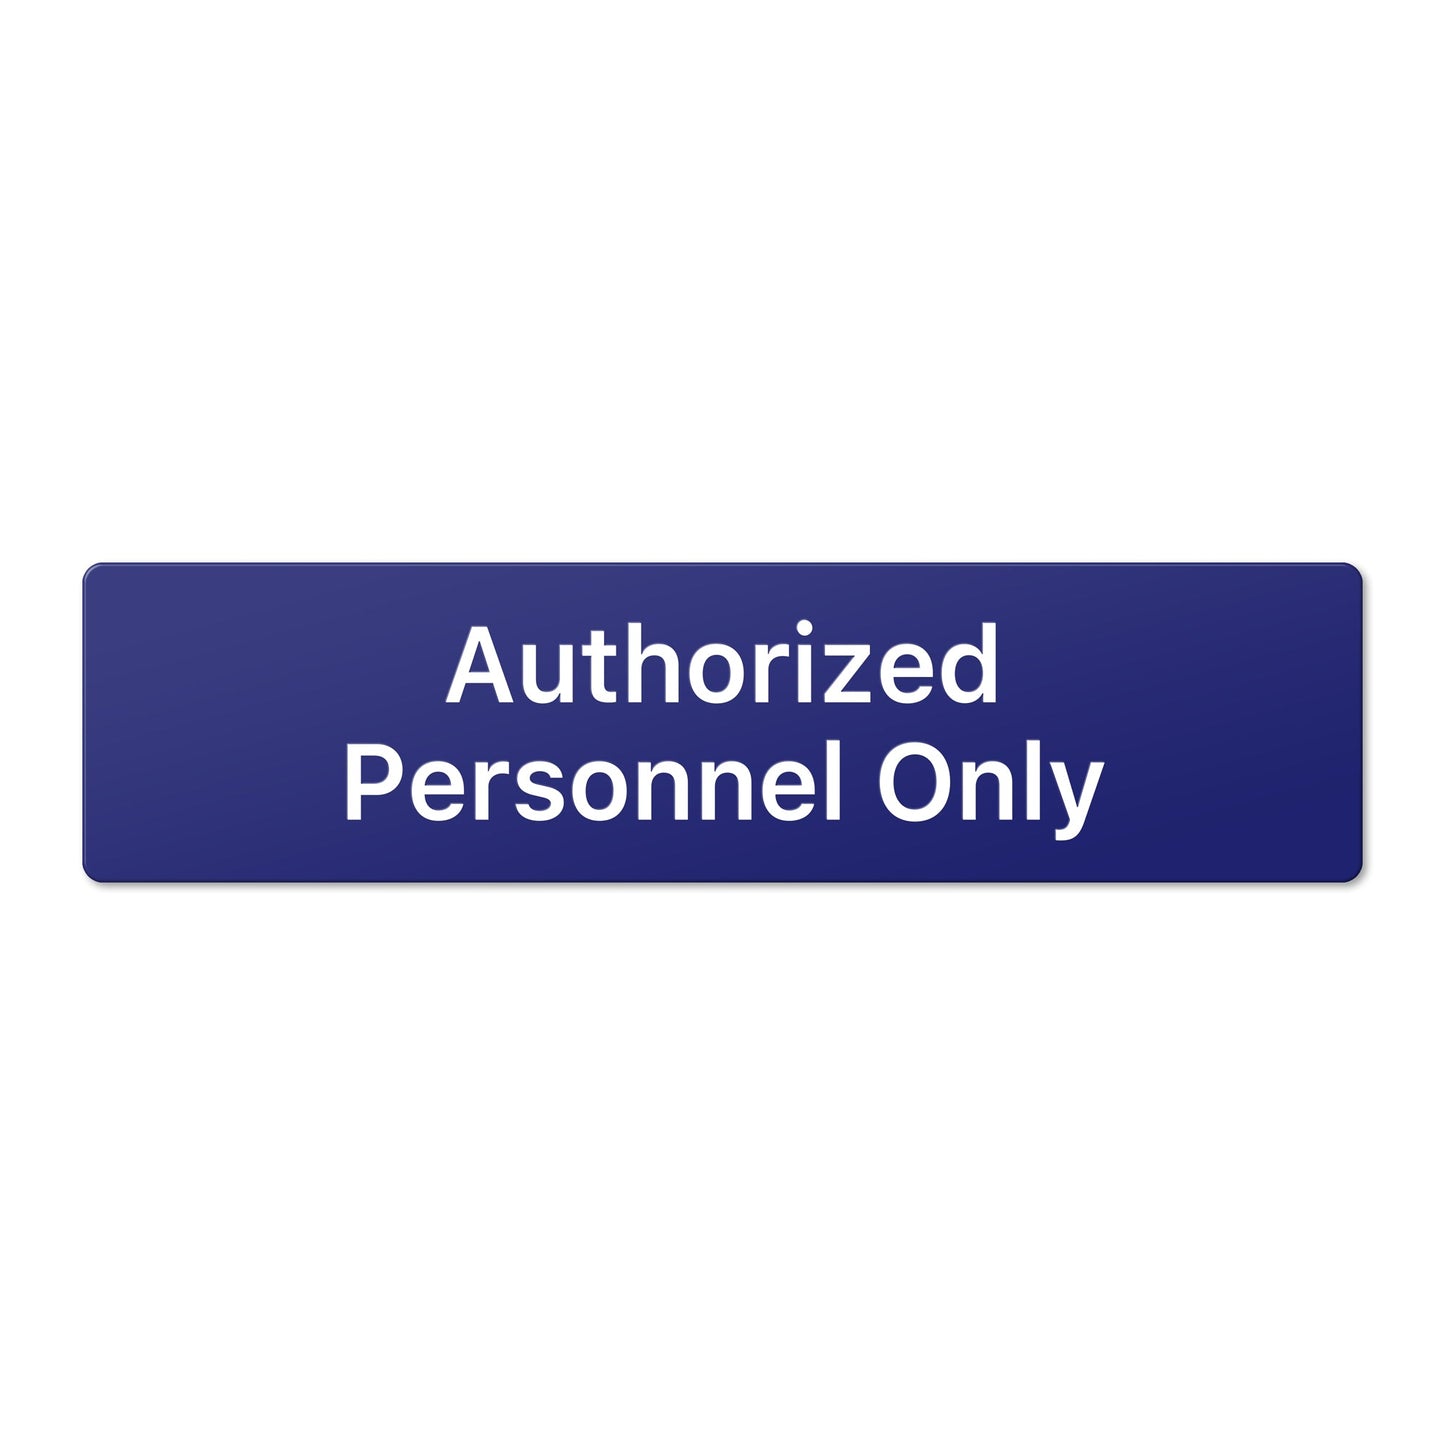 Authorized Personnel Only